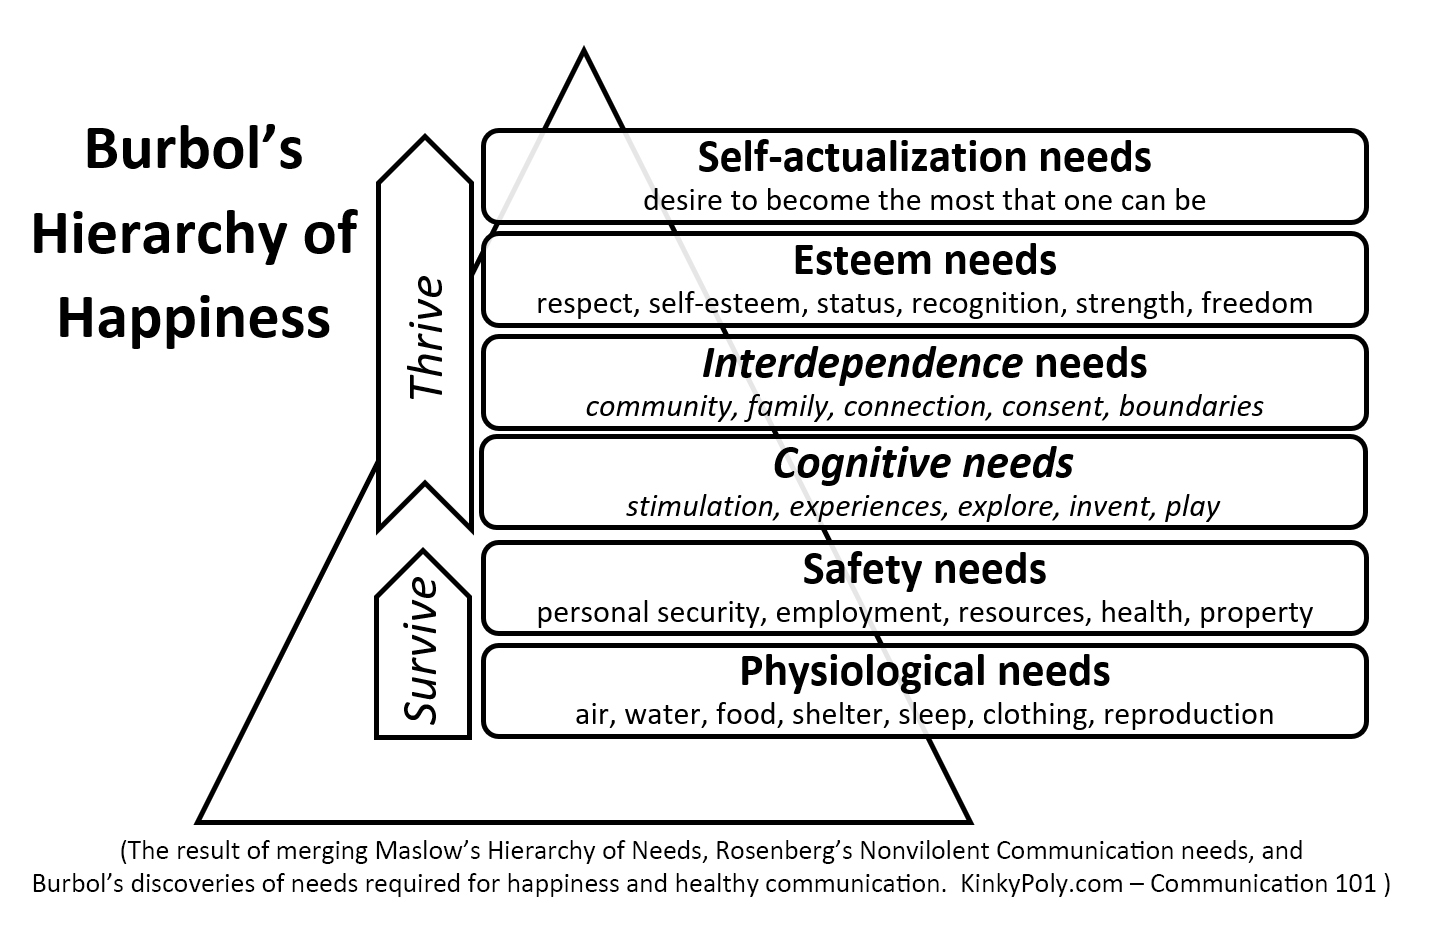 Burbol’s Hierarchy of Happiness